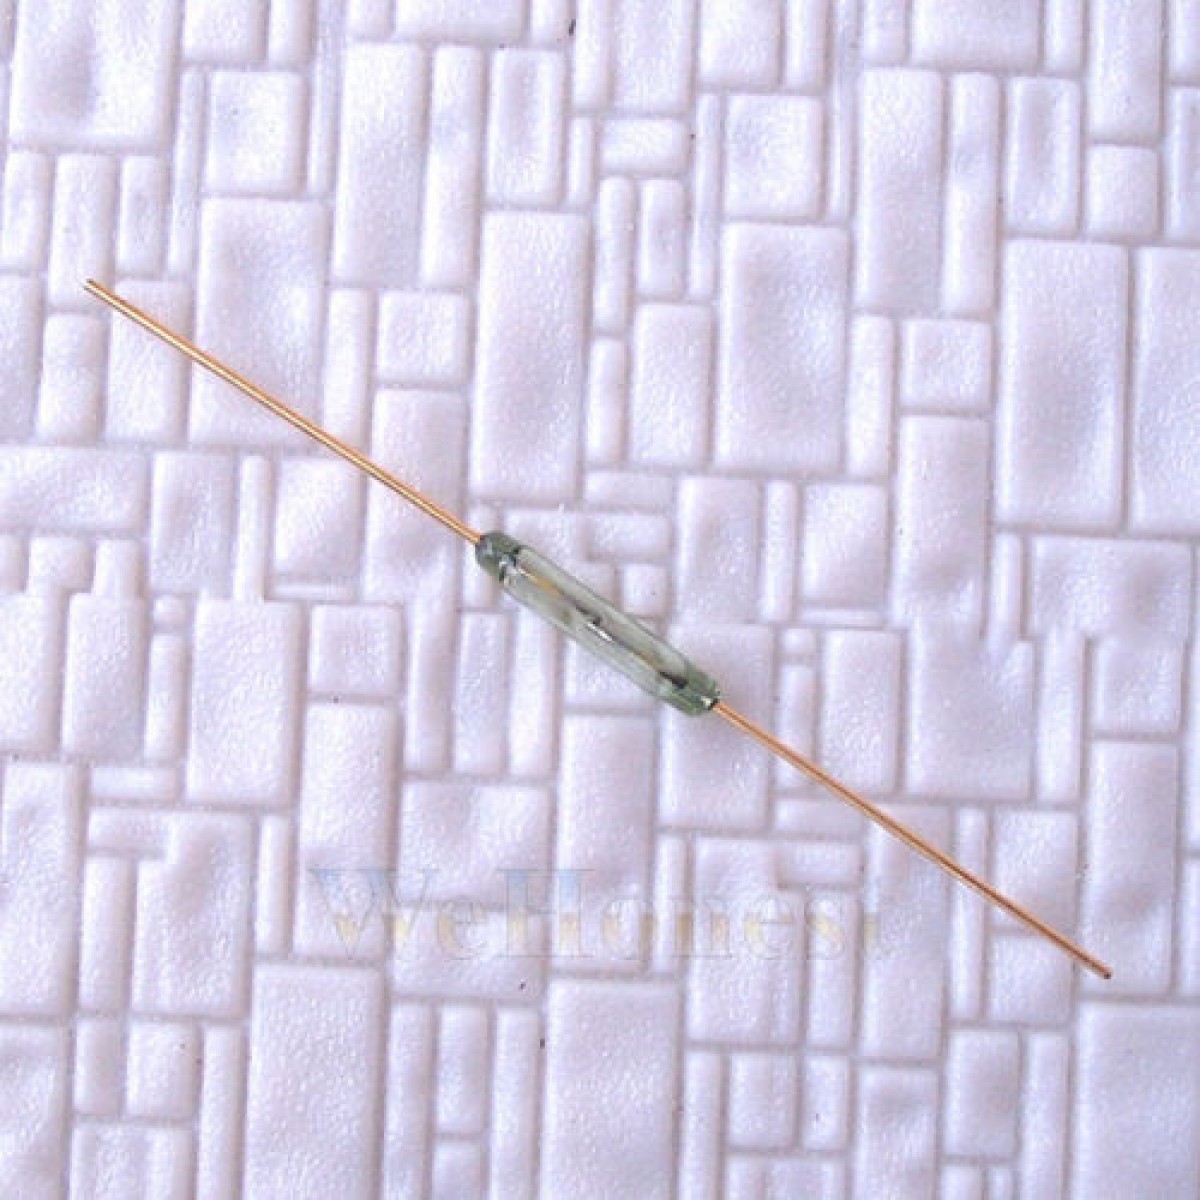 5 pcs Super Miniature dia.2mm Reed Switches Normally Open -- Auto Your Layouts